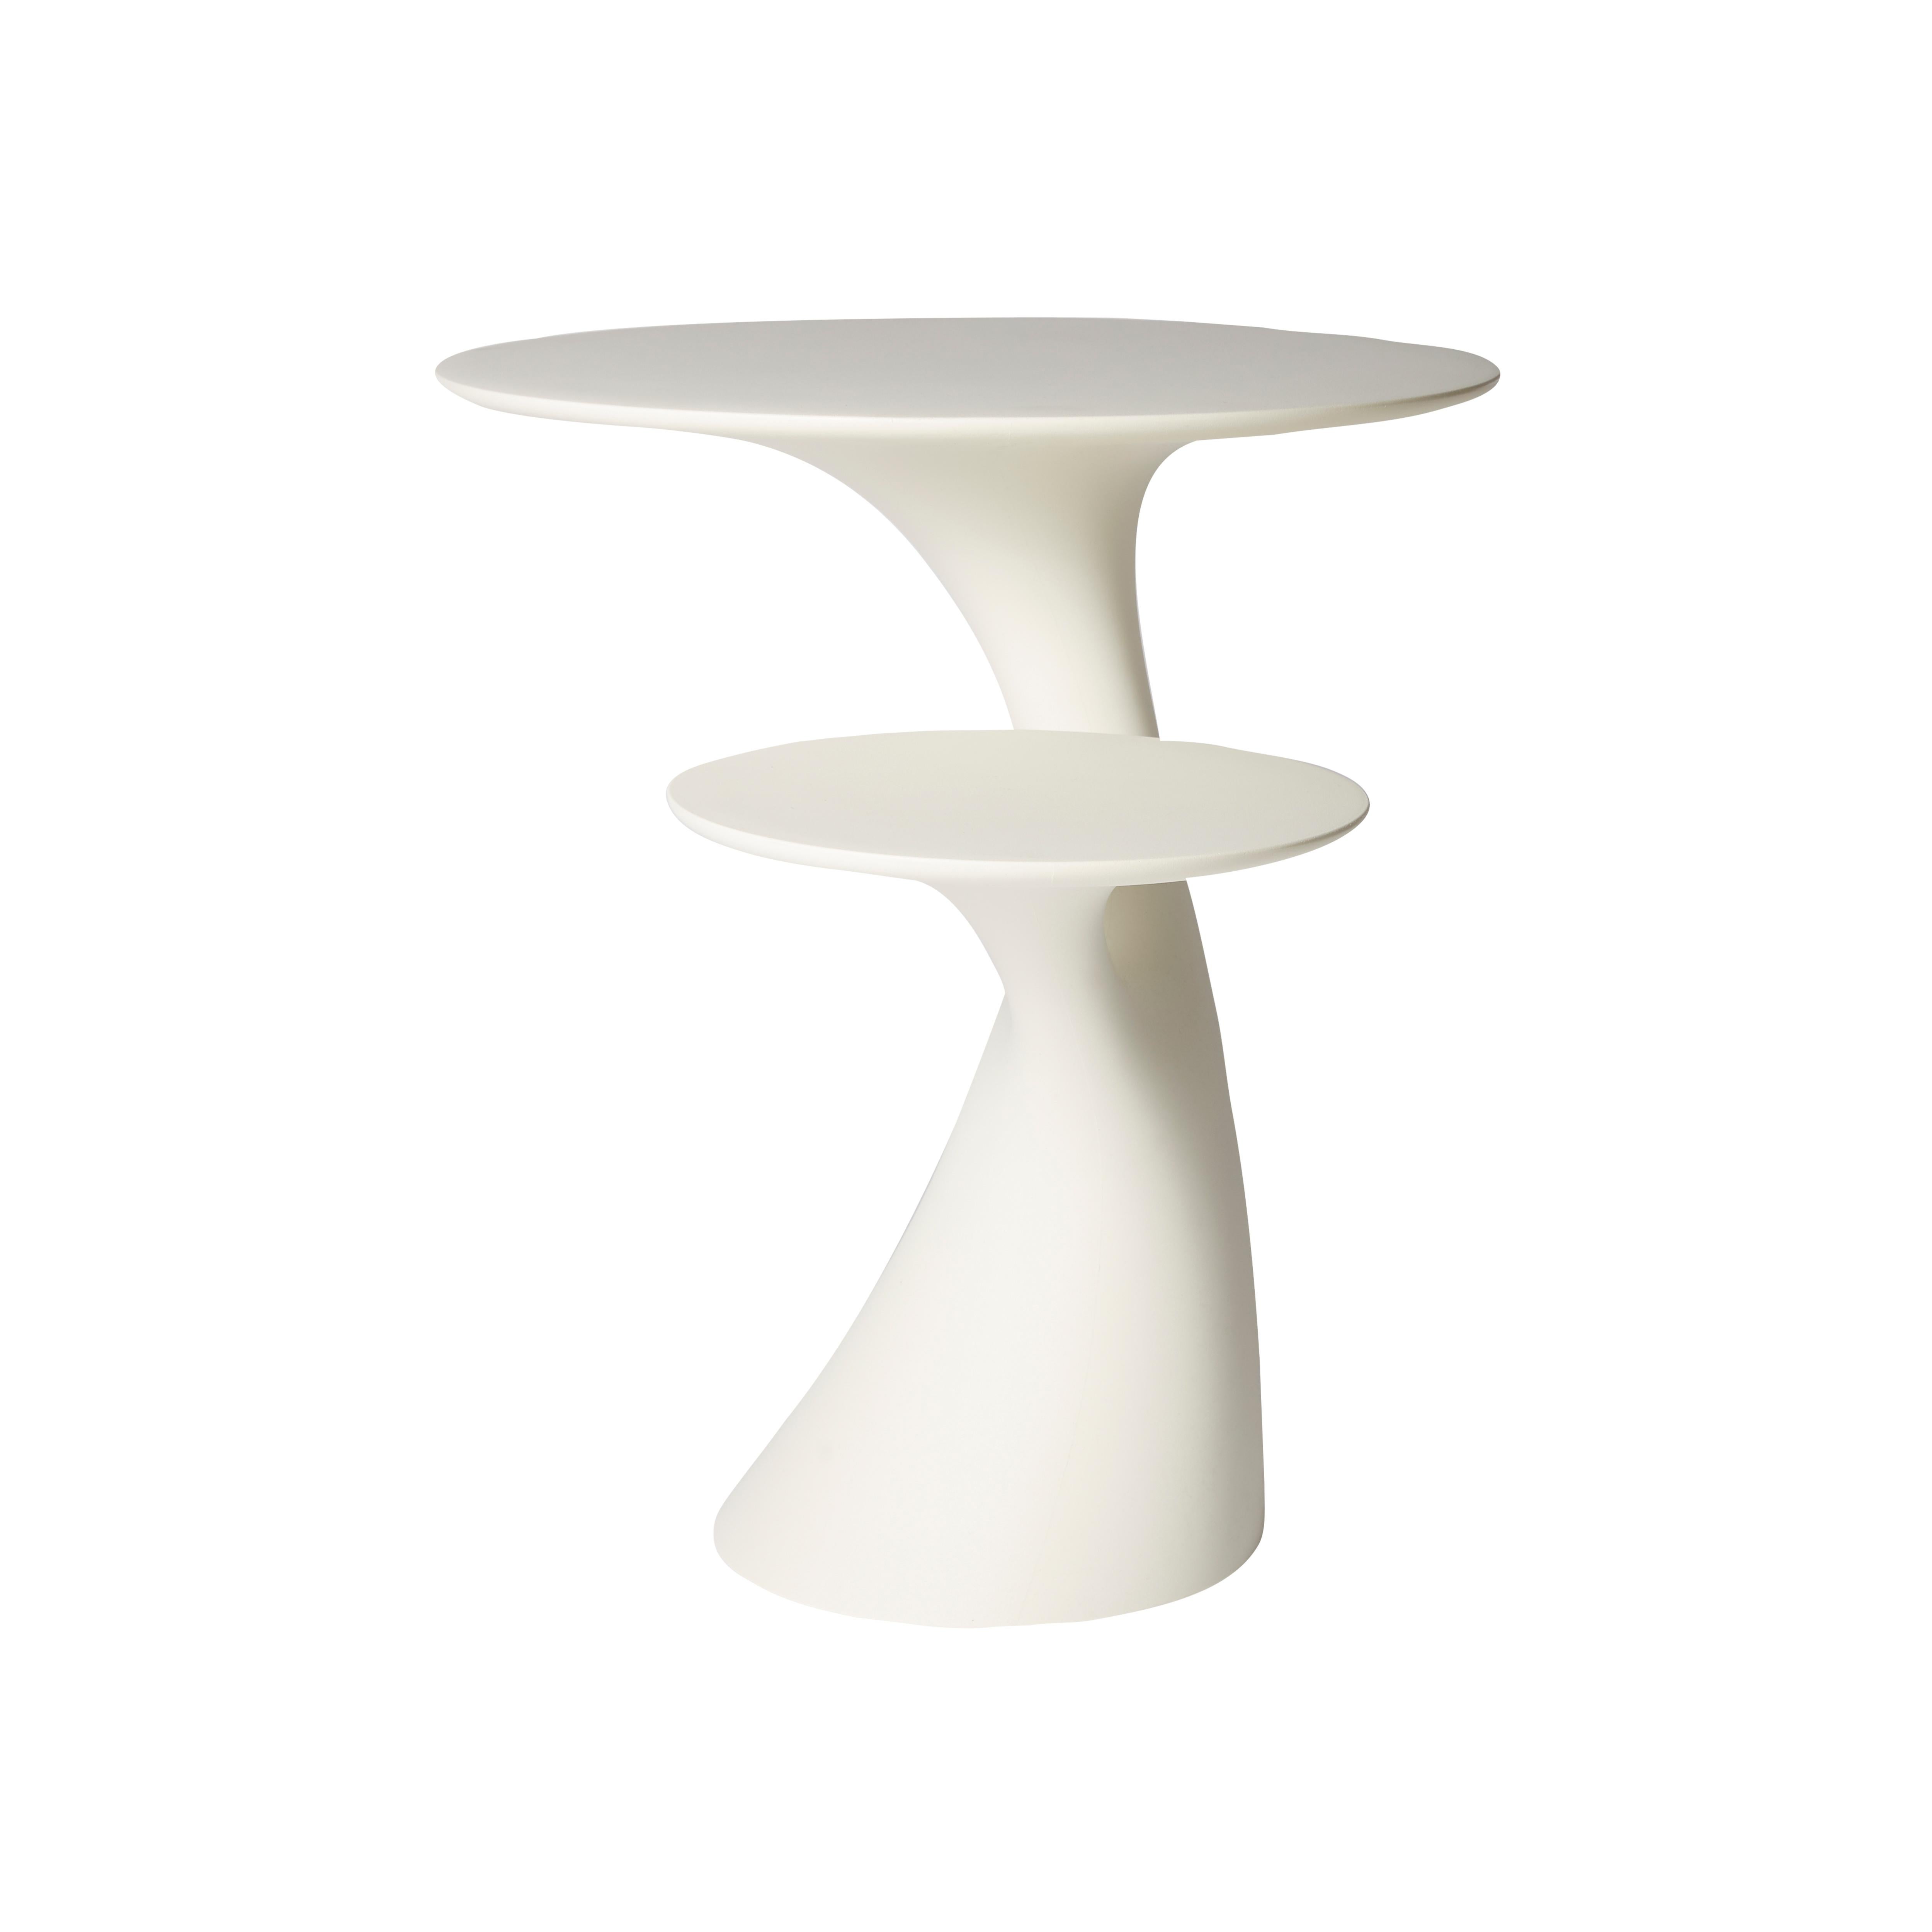 For Sale: White Modern Plastic White Gray Green Pink or Tree Side Table by Stefano Giovannoni 2